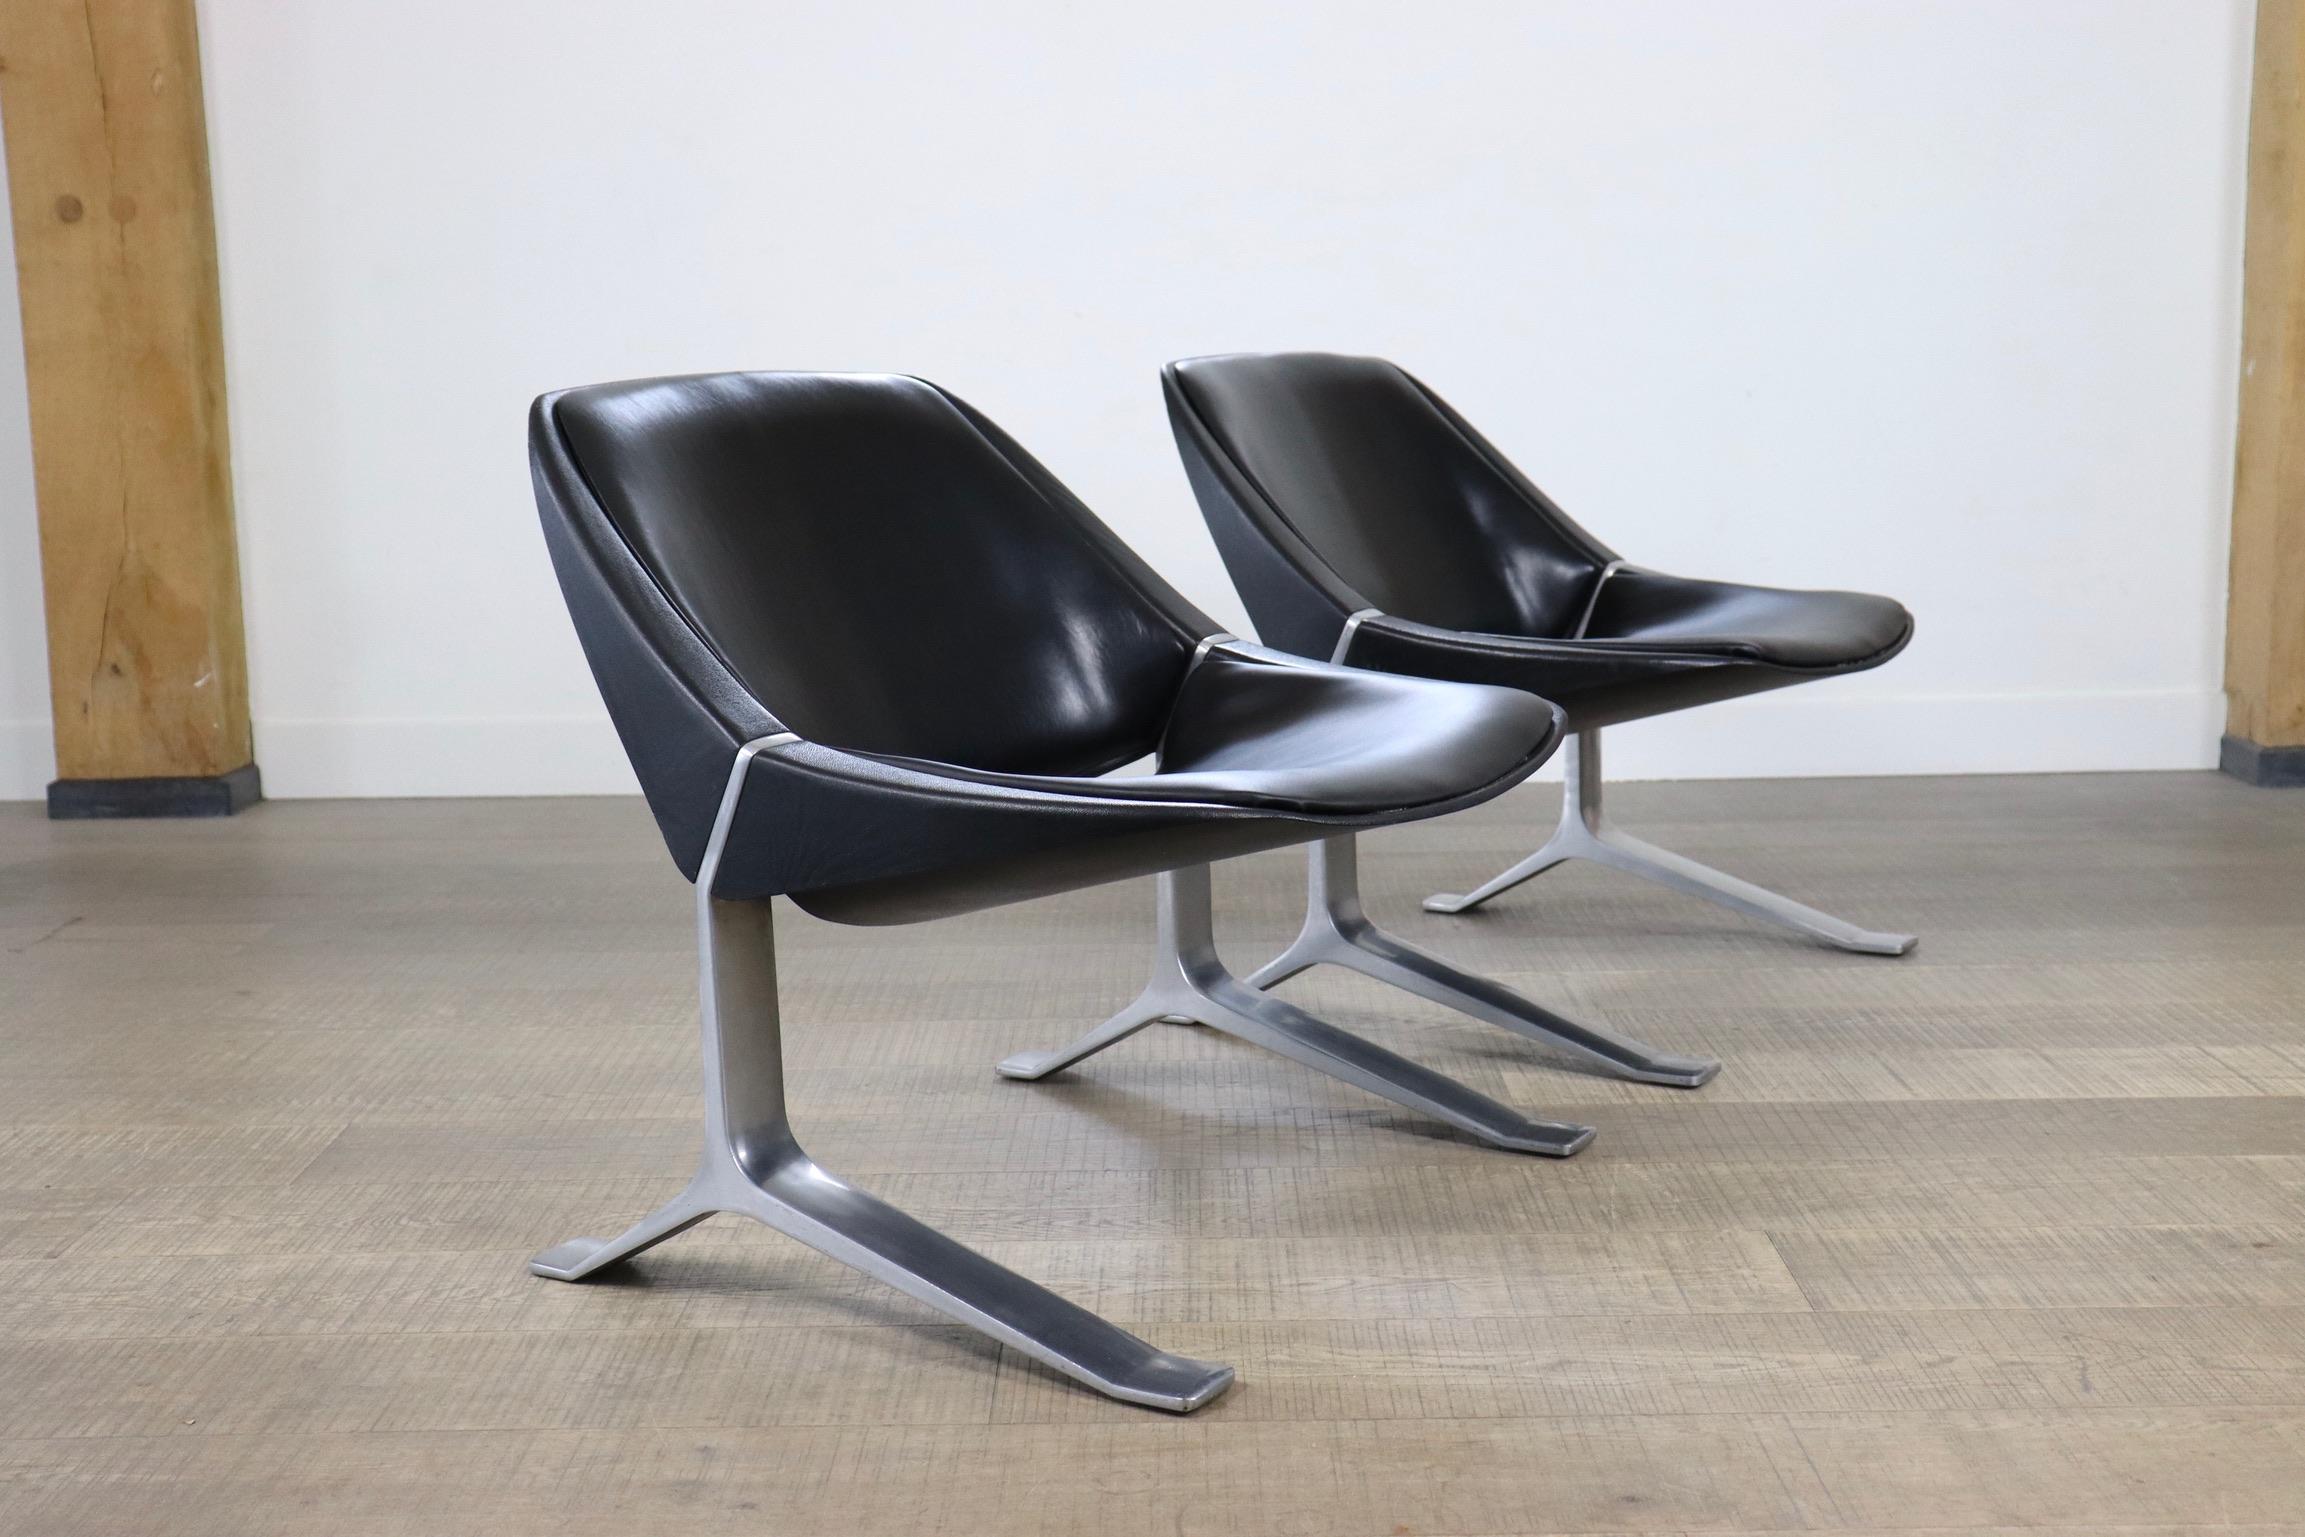 Rare pair of sculptural lounge chairs designed by Knut Hesterberg and manufactured by Selectform Furniture, Germany 1971. The chairs have solid cast aluminium legs and molded plastic shell seats covered black eco leather. These chairs are beautiful